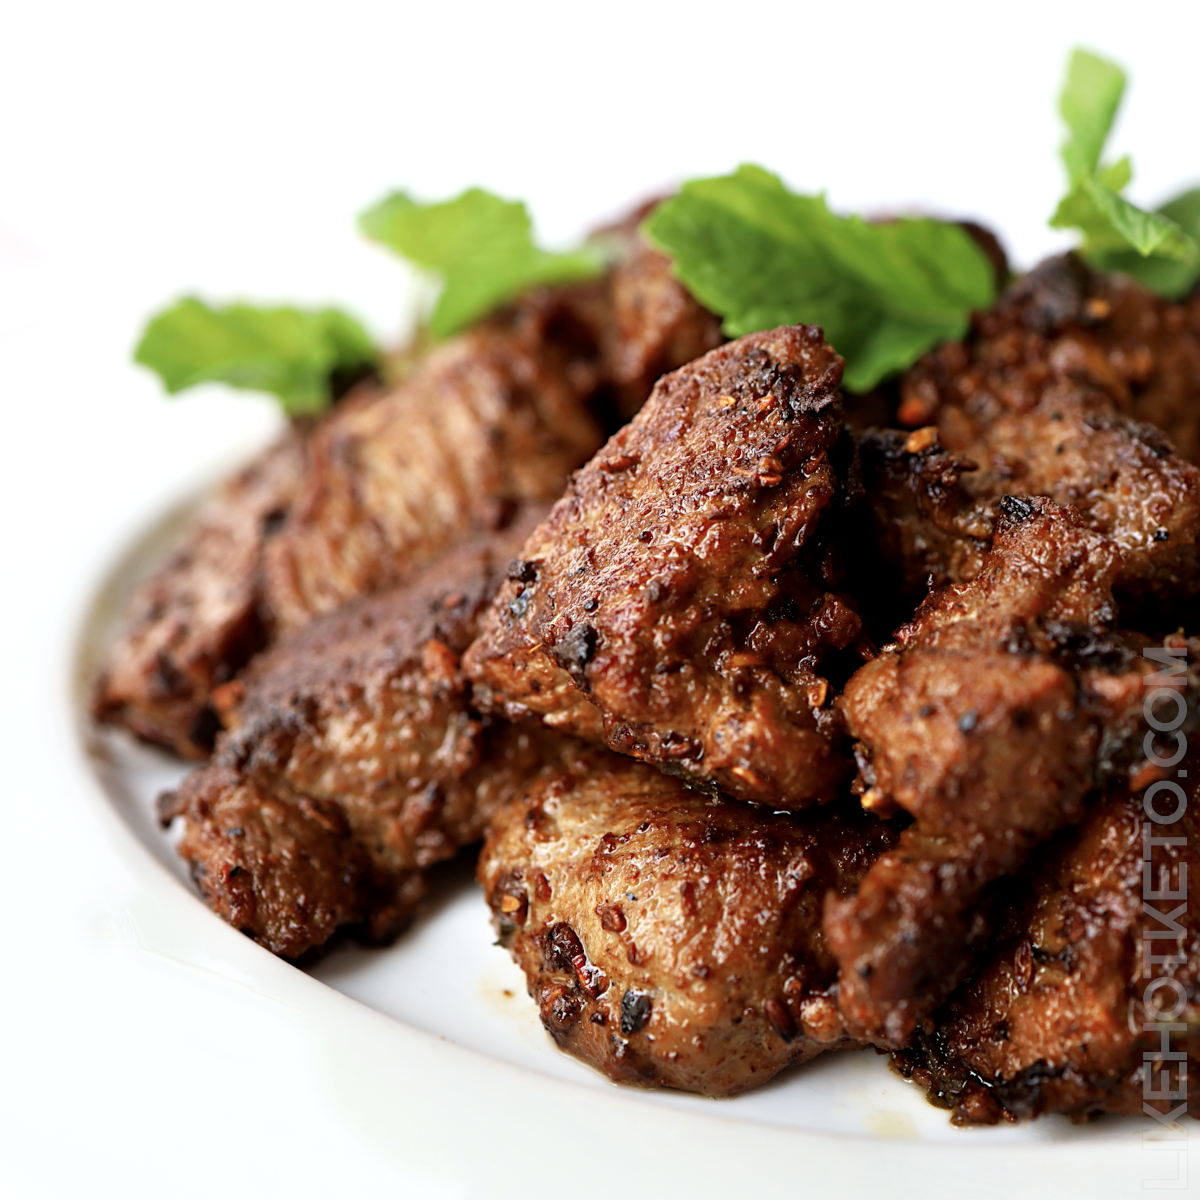 A plate with cooked camel meat pieces in yogurt garnished with fresh mint leaves.